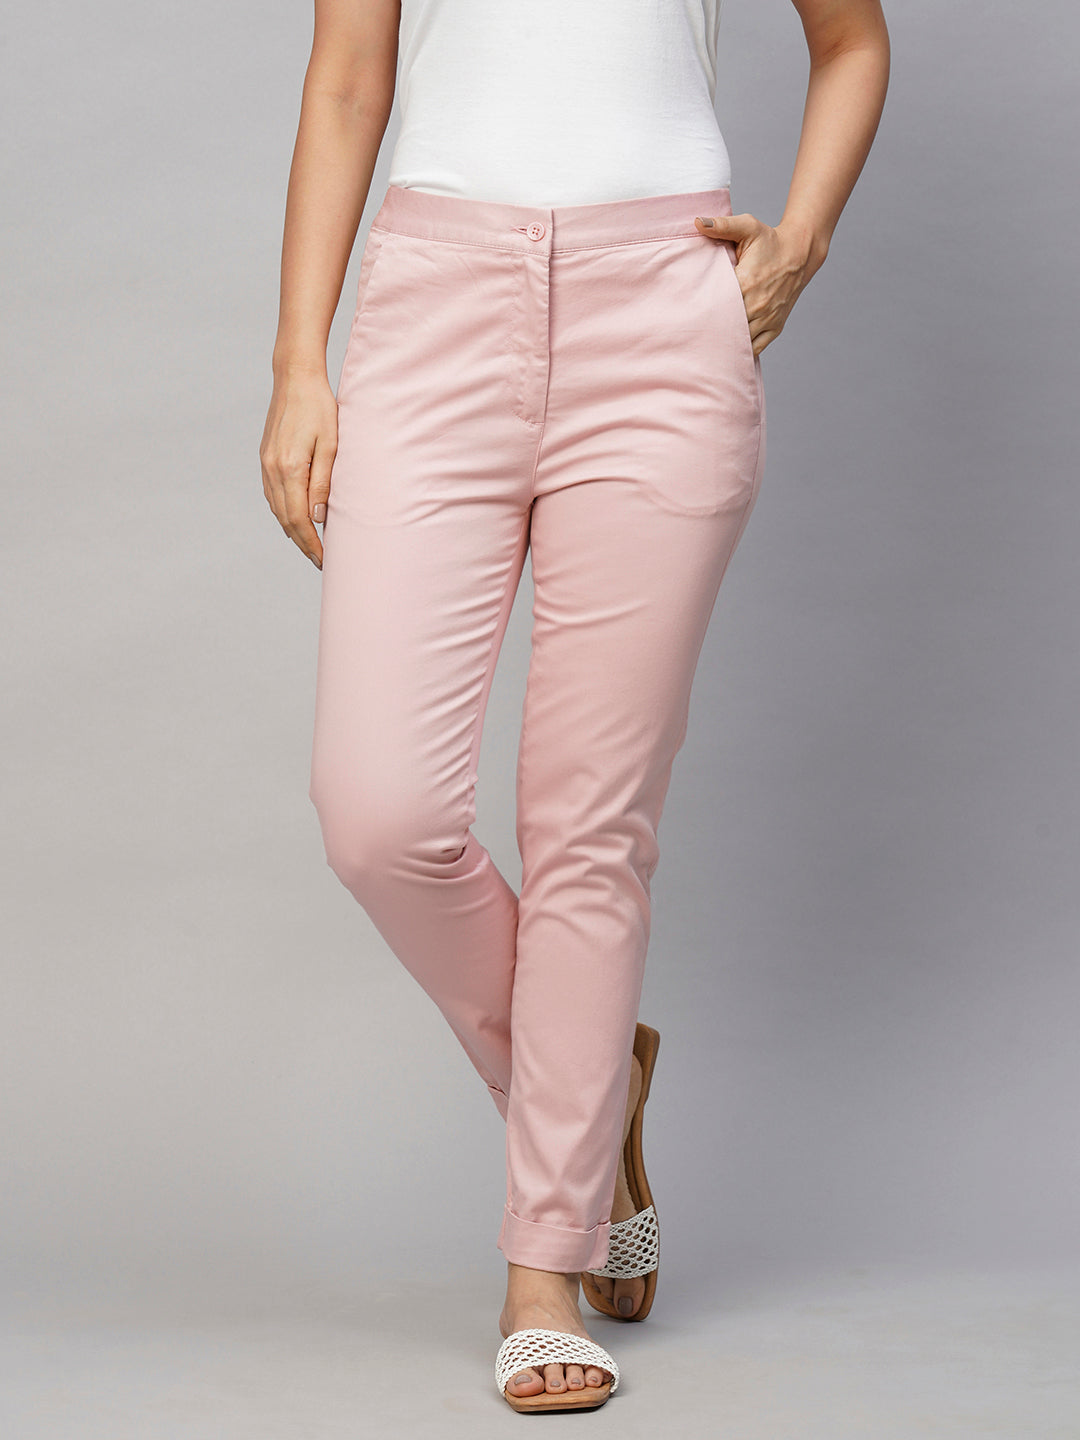 Buy Women Hot Pink Buttoned Cotton Shirt And Pants CoOrd Set  Trends  Online India  FabAlley